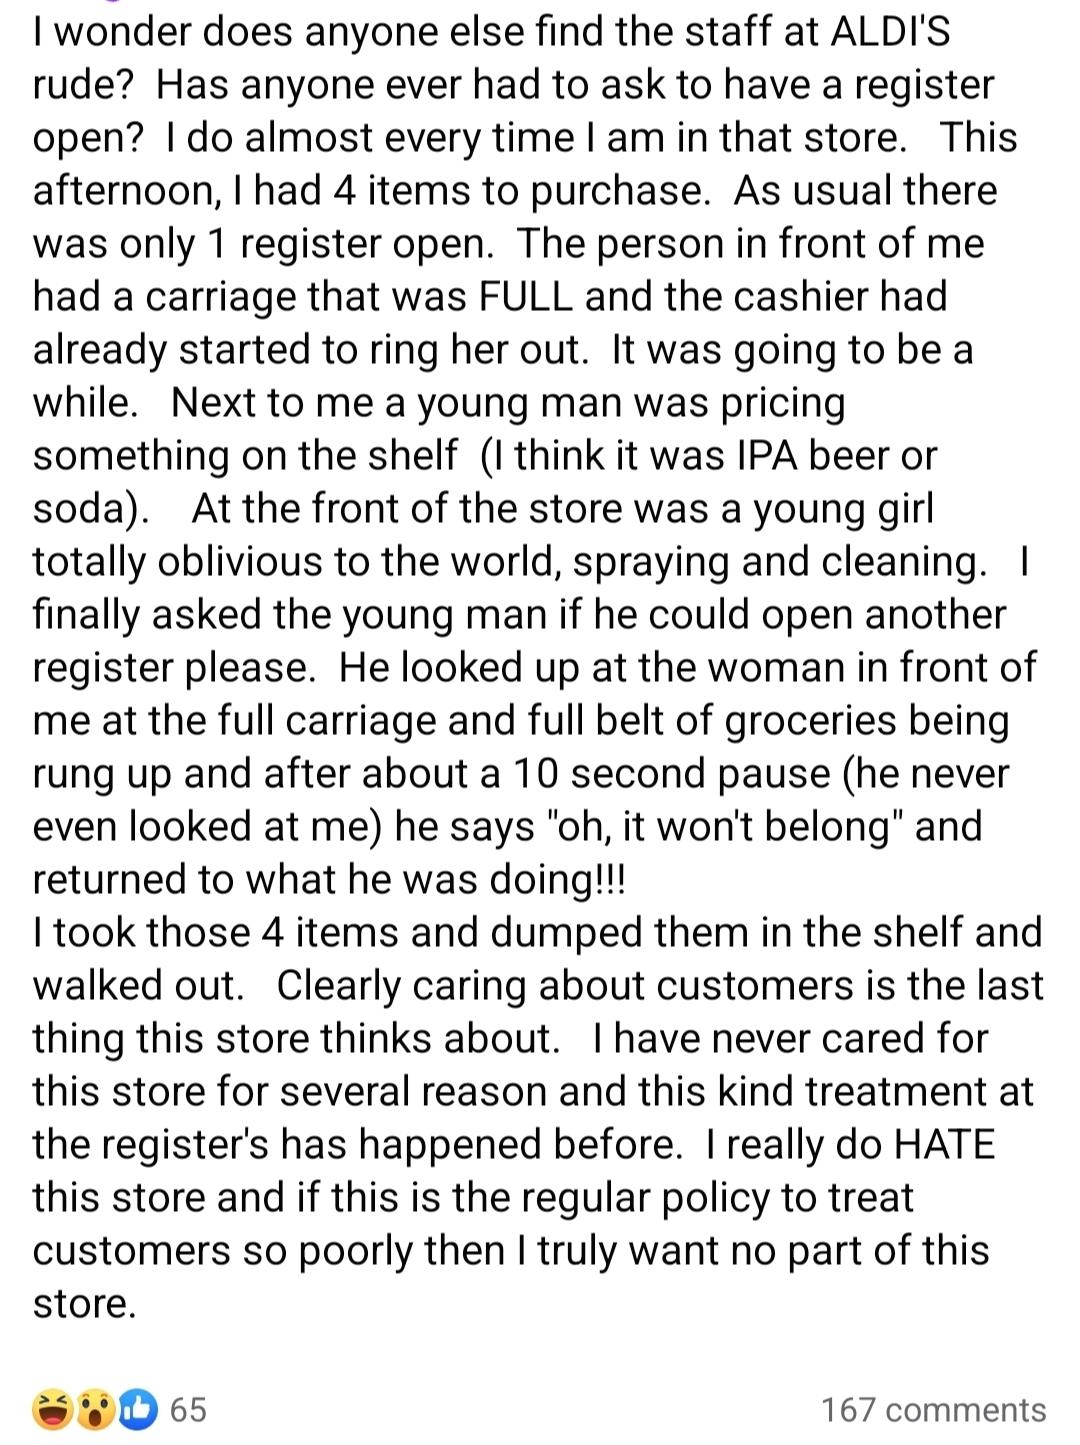 entitled people getting owned - document - I wonder does anyone else find the staff at Aldi'S rude? Has anyone ever had to ask to have a register open? I do almost every time I am in that store. This afternoon, I had 4 items to purchase. As usual there wa